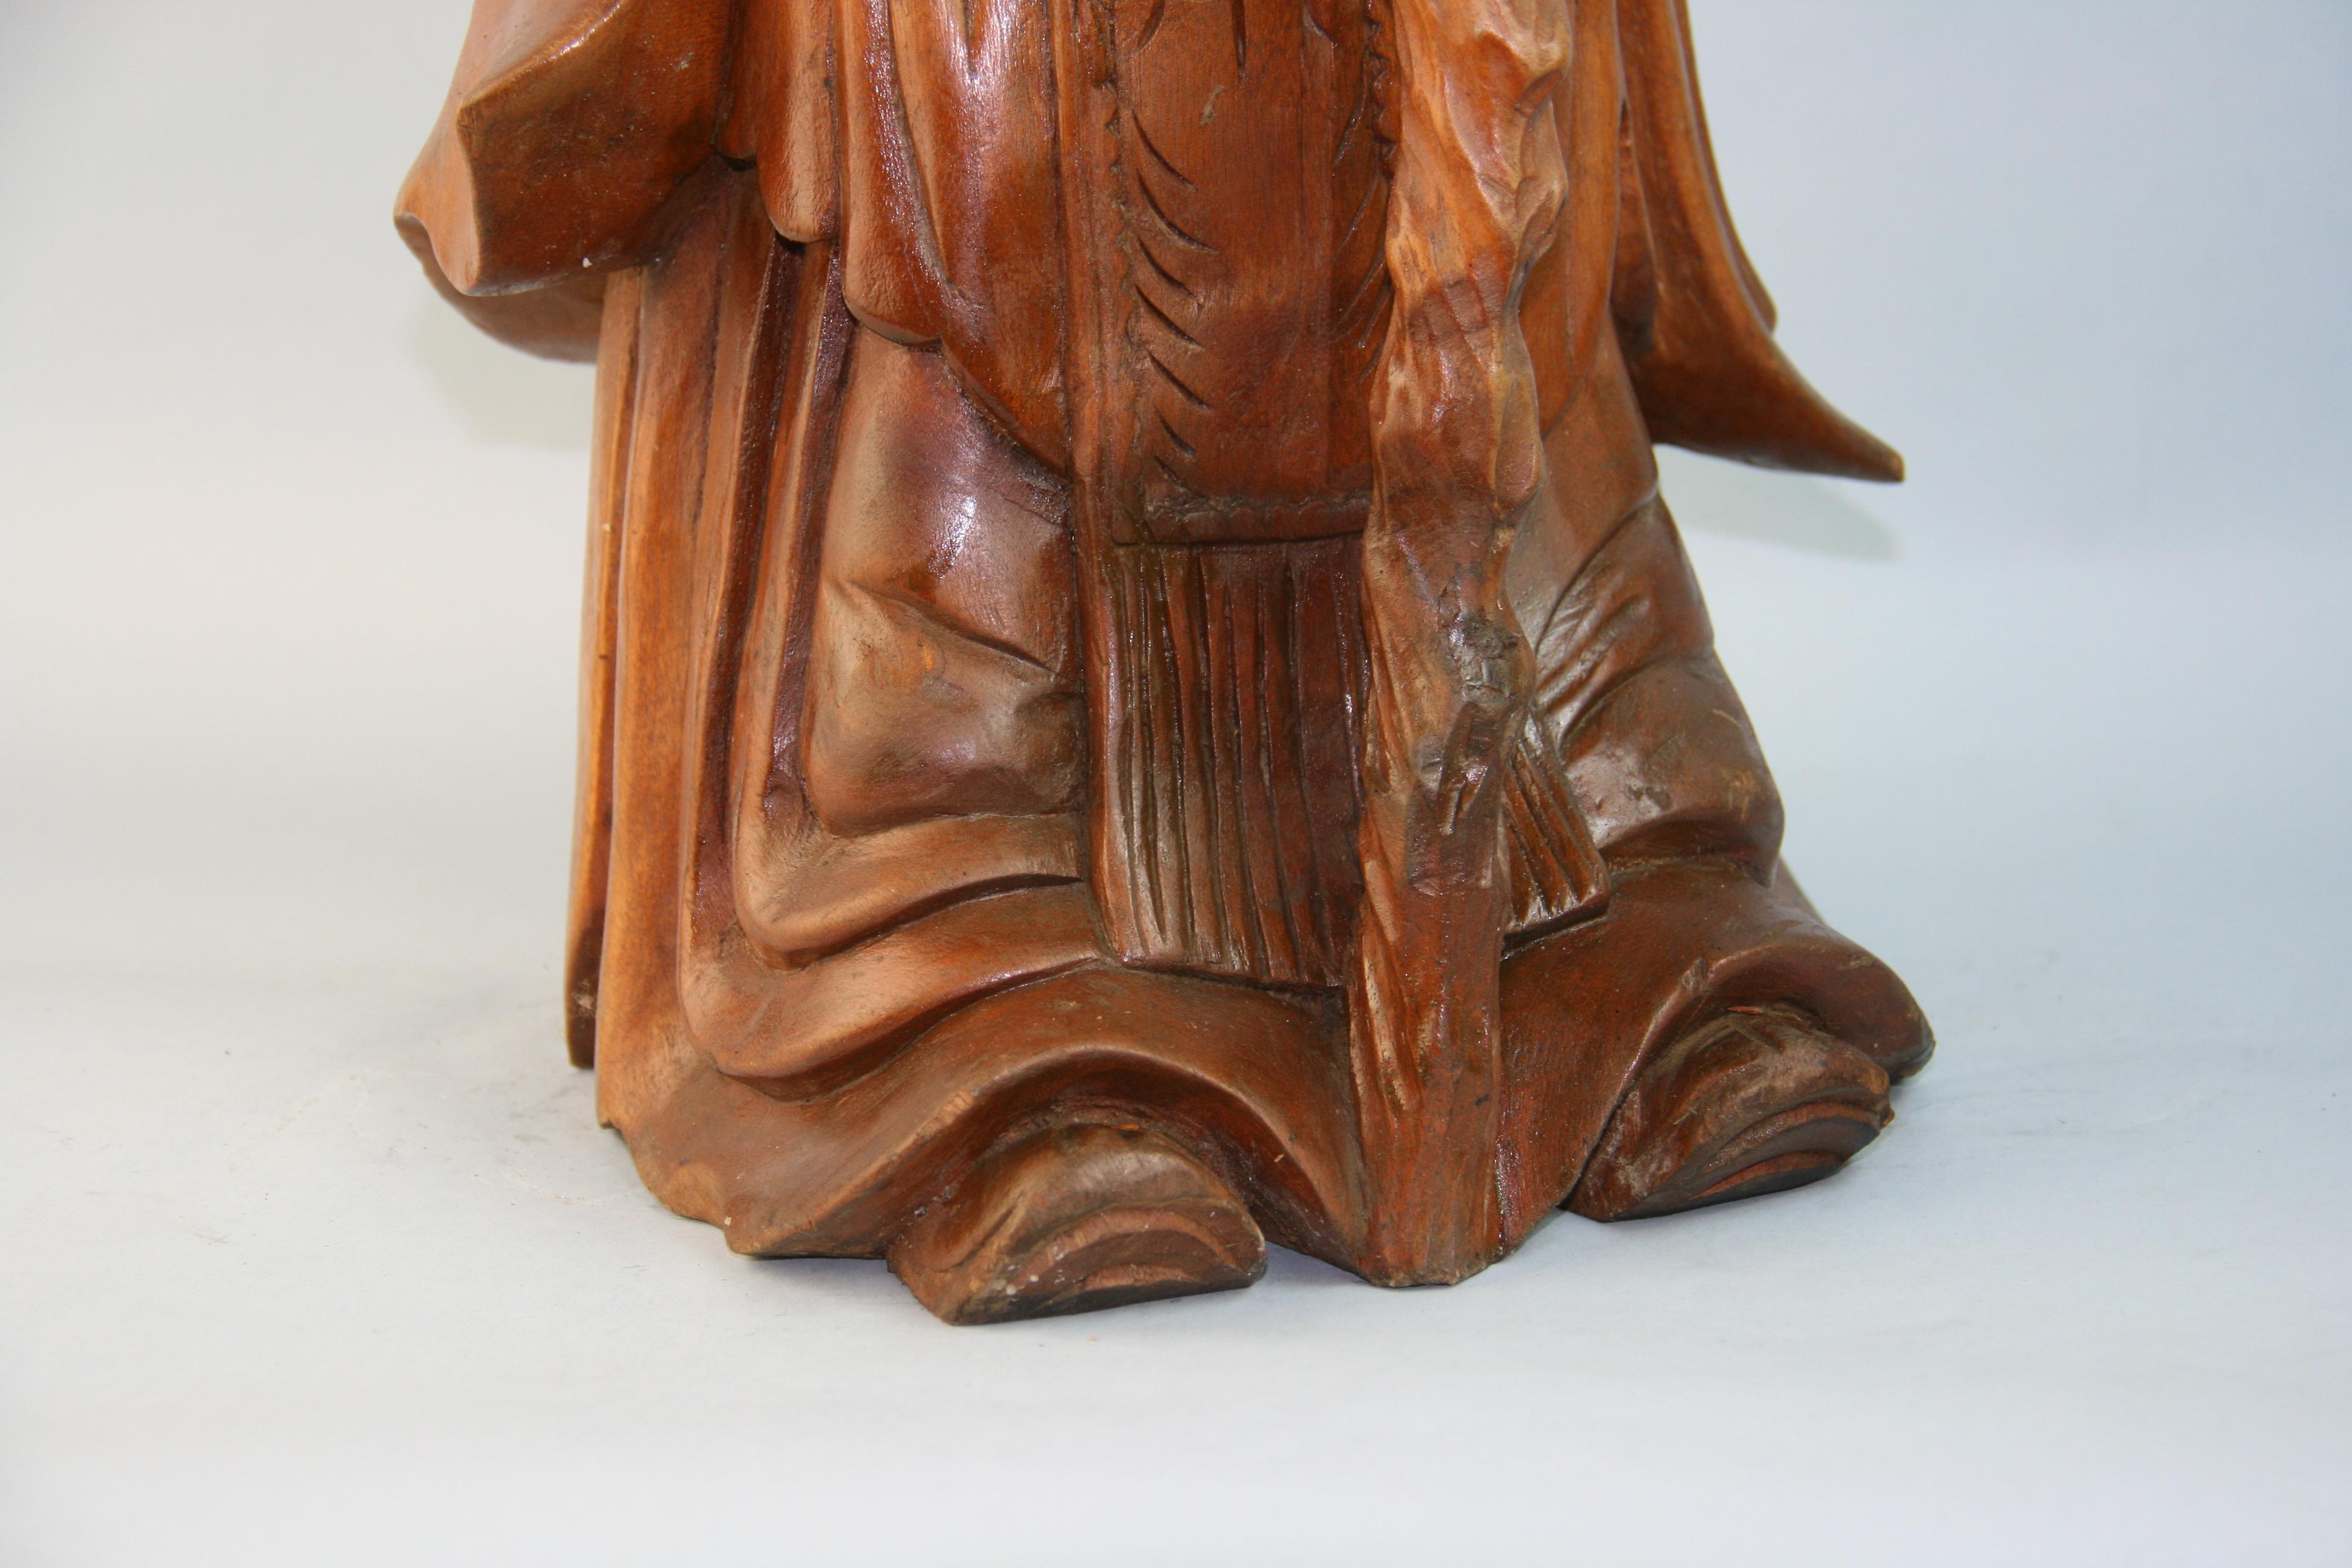 Japanese Oversized Wise Buddha Hand Carved Boxwood Sculpture Early 20th Century For Sale 3